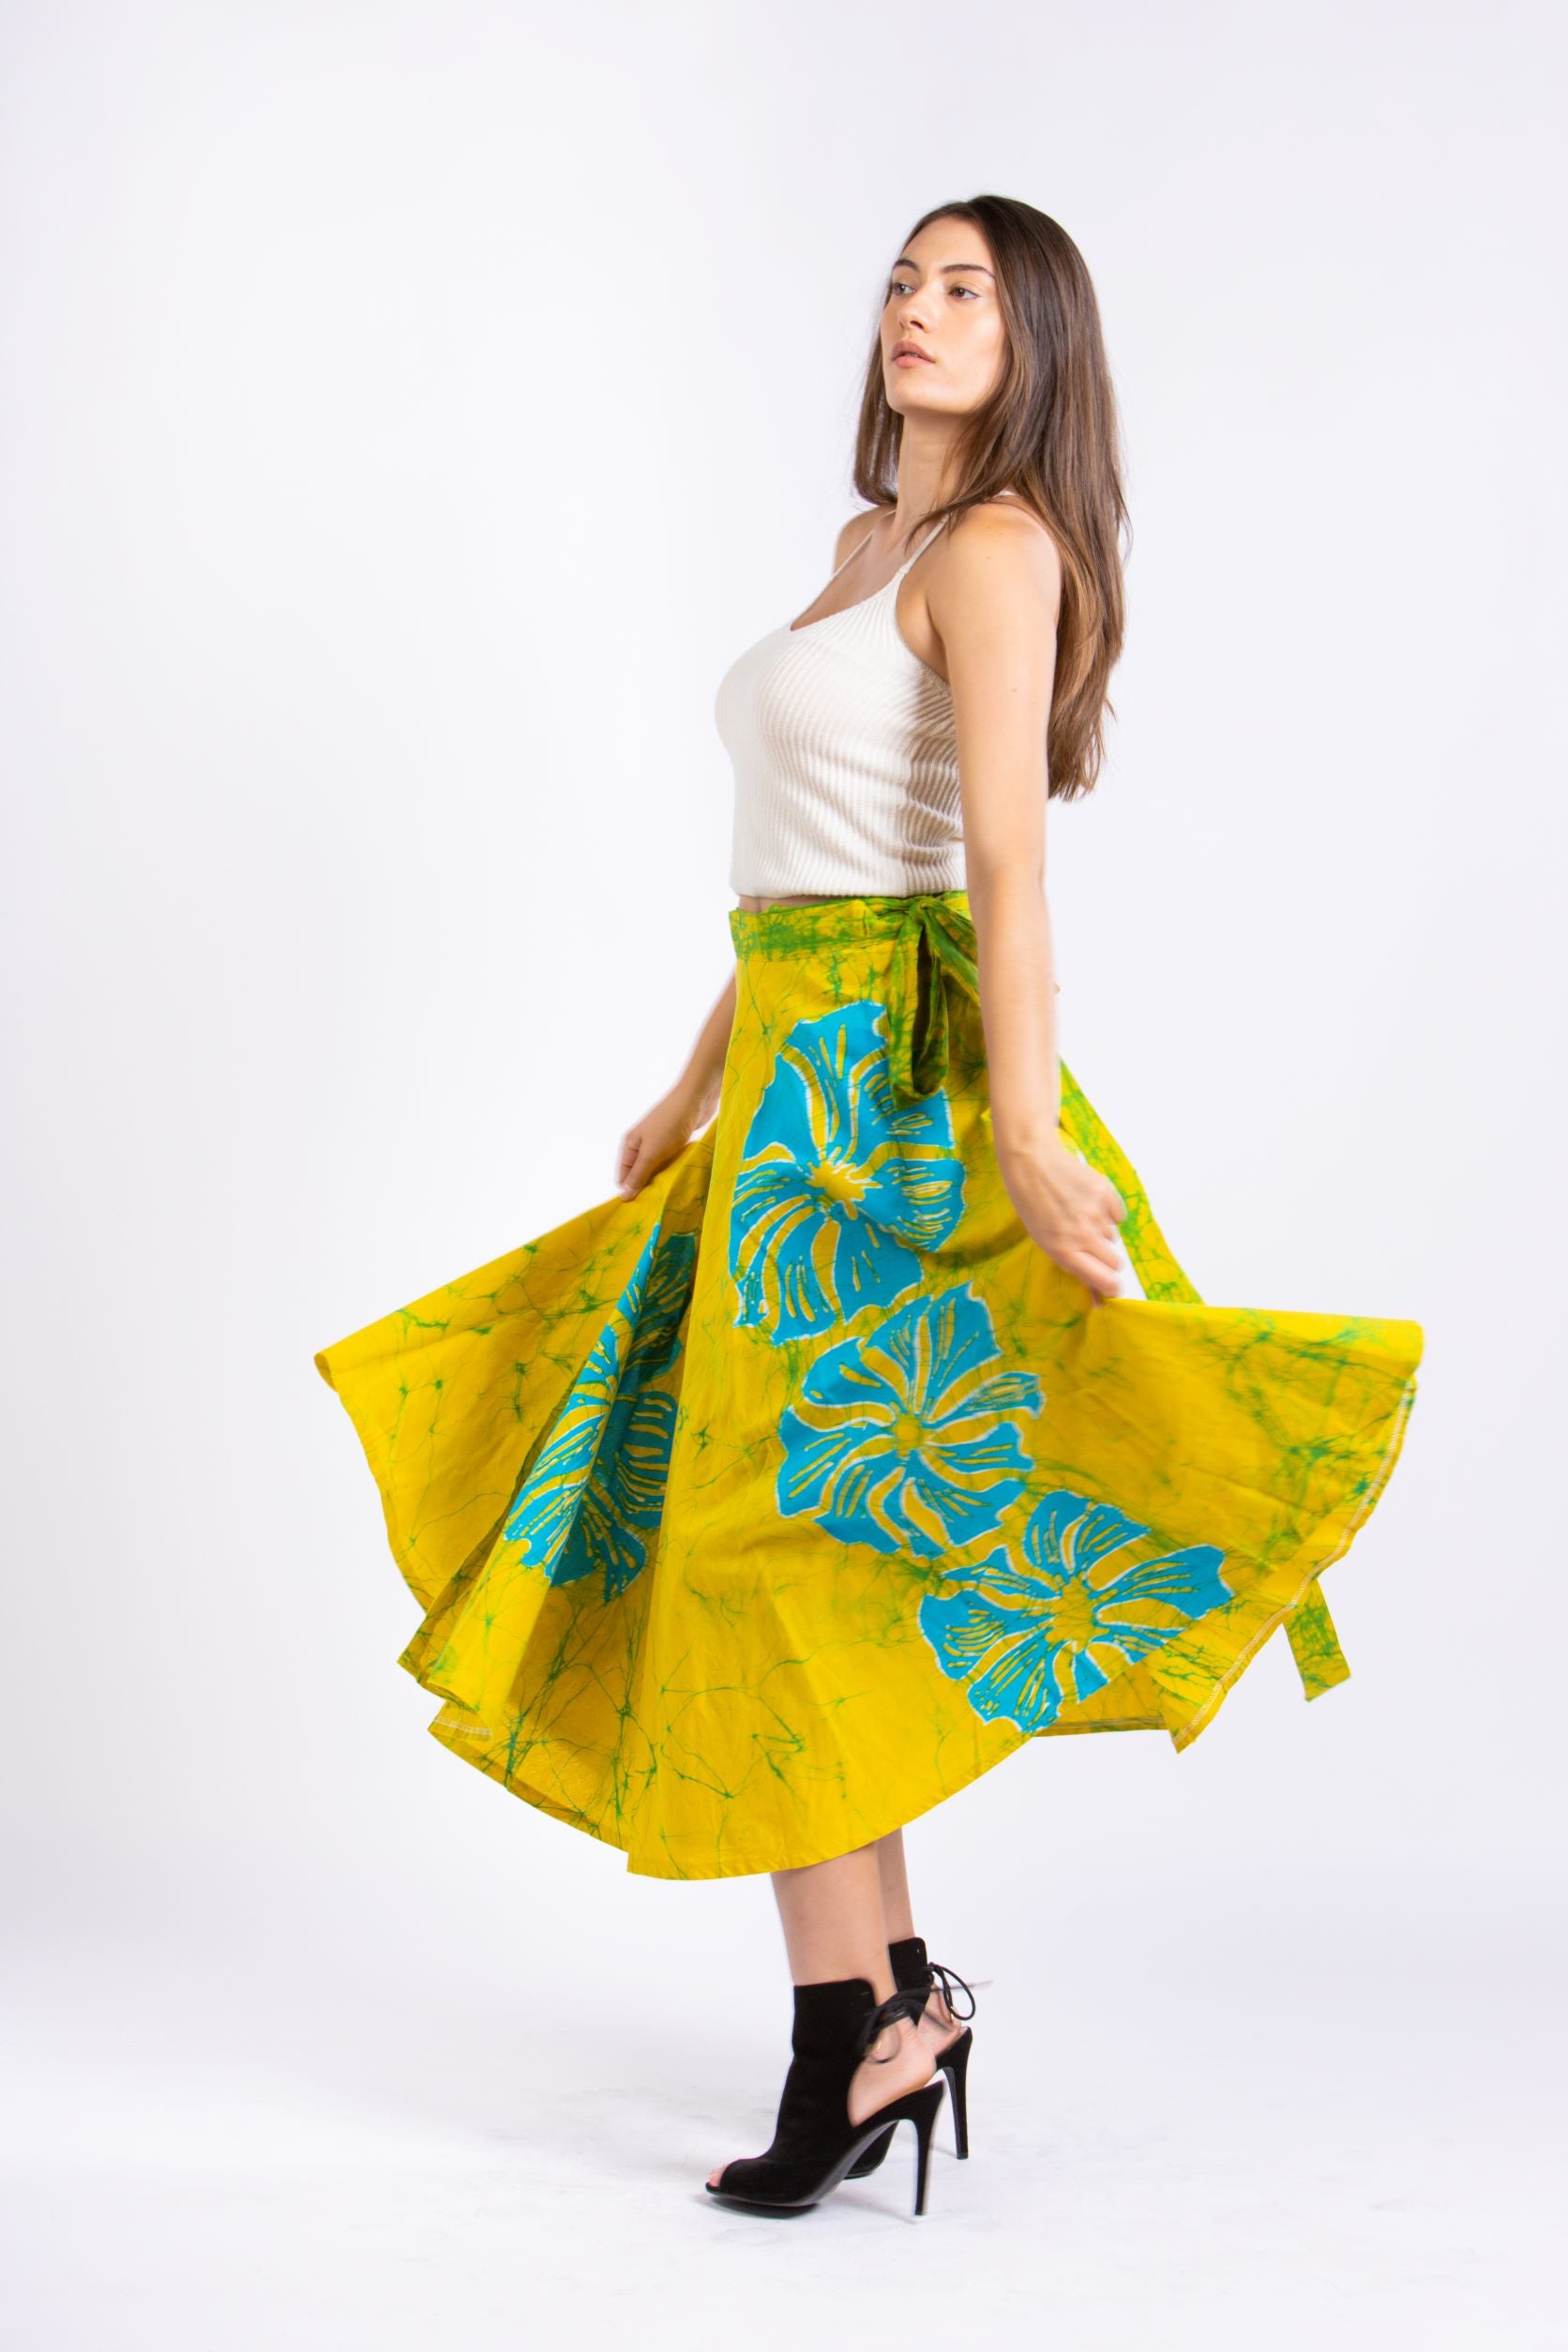 Cotton Collection celebrates new beginnings with whimsical Spring line -  Adaderana Biz English